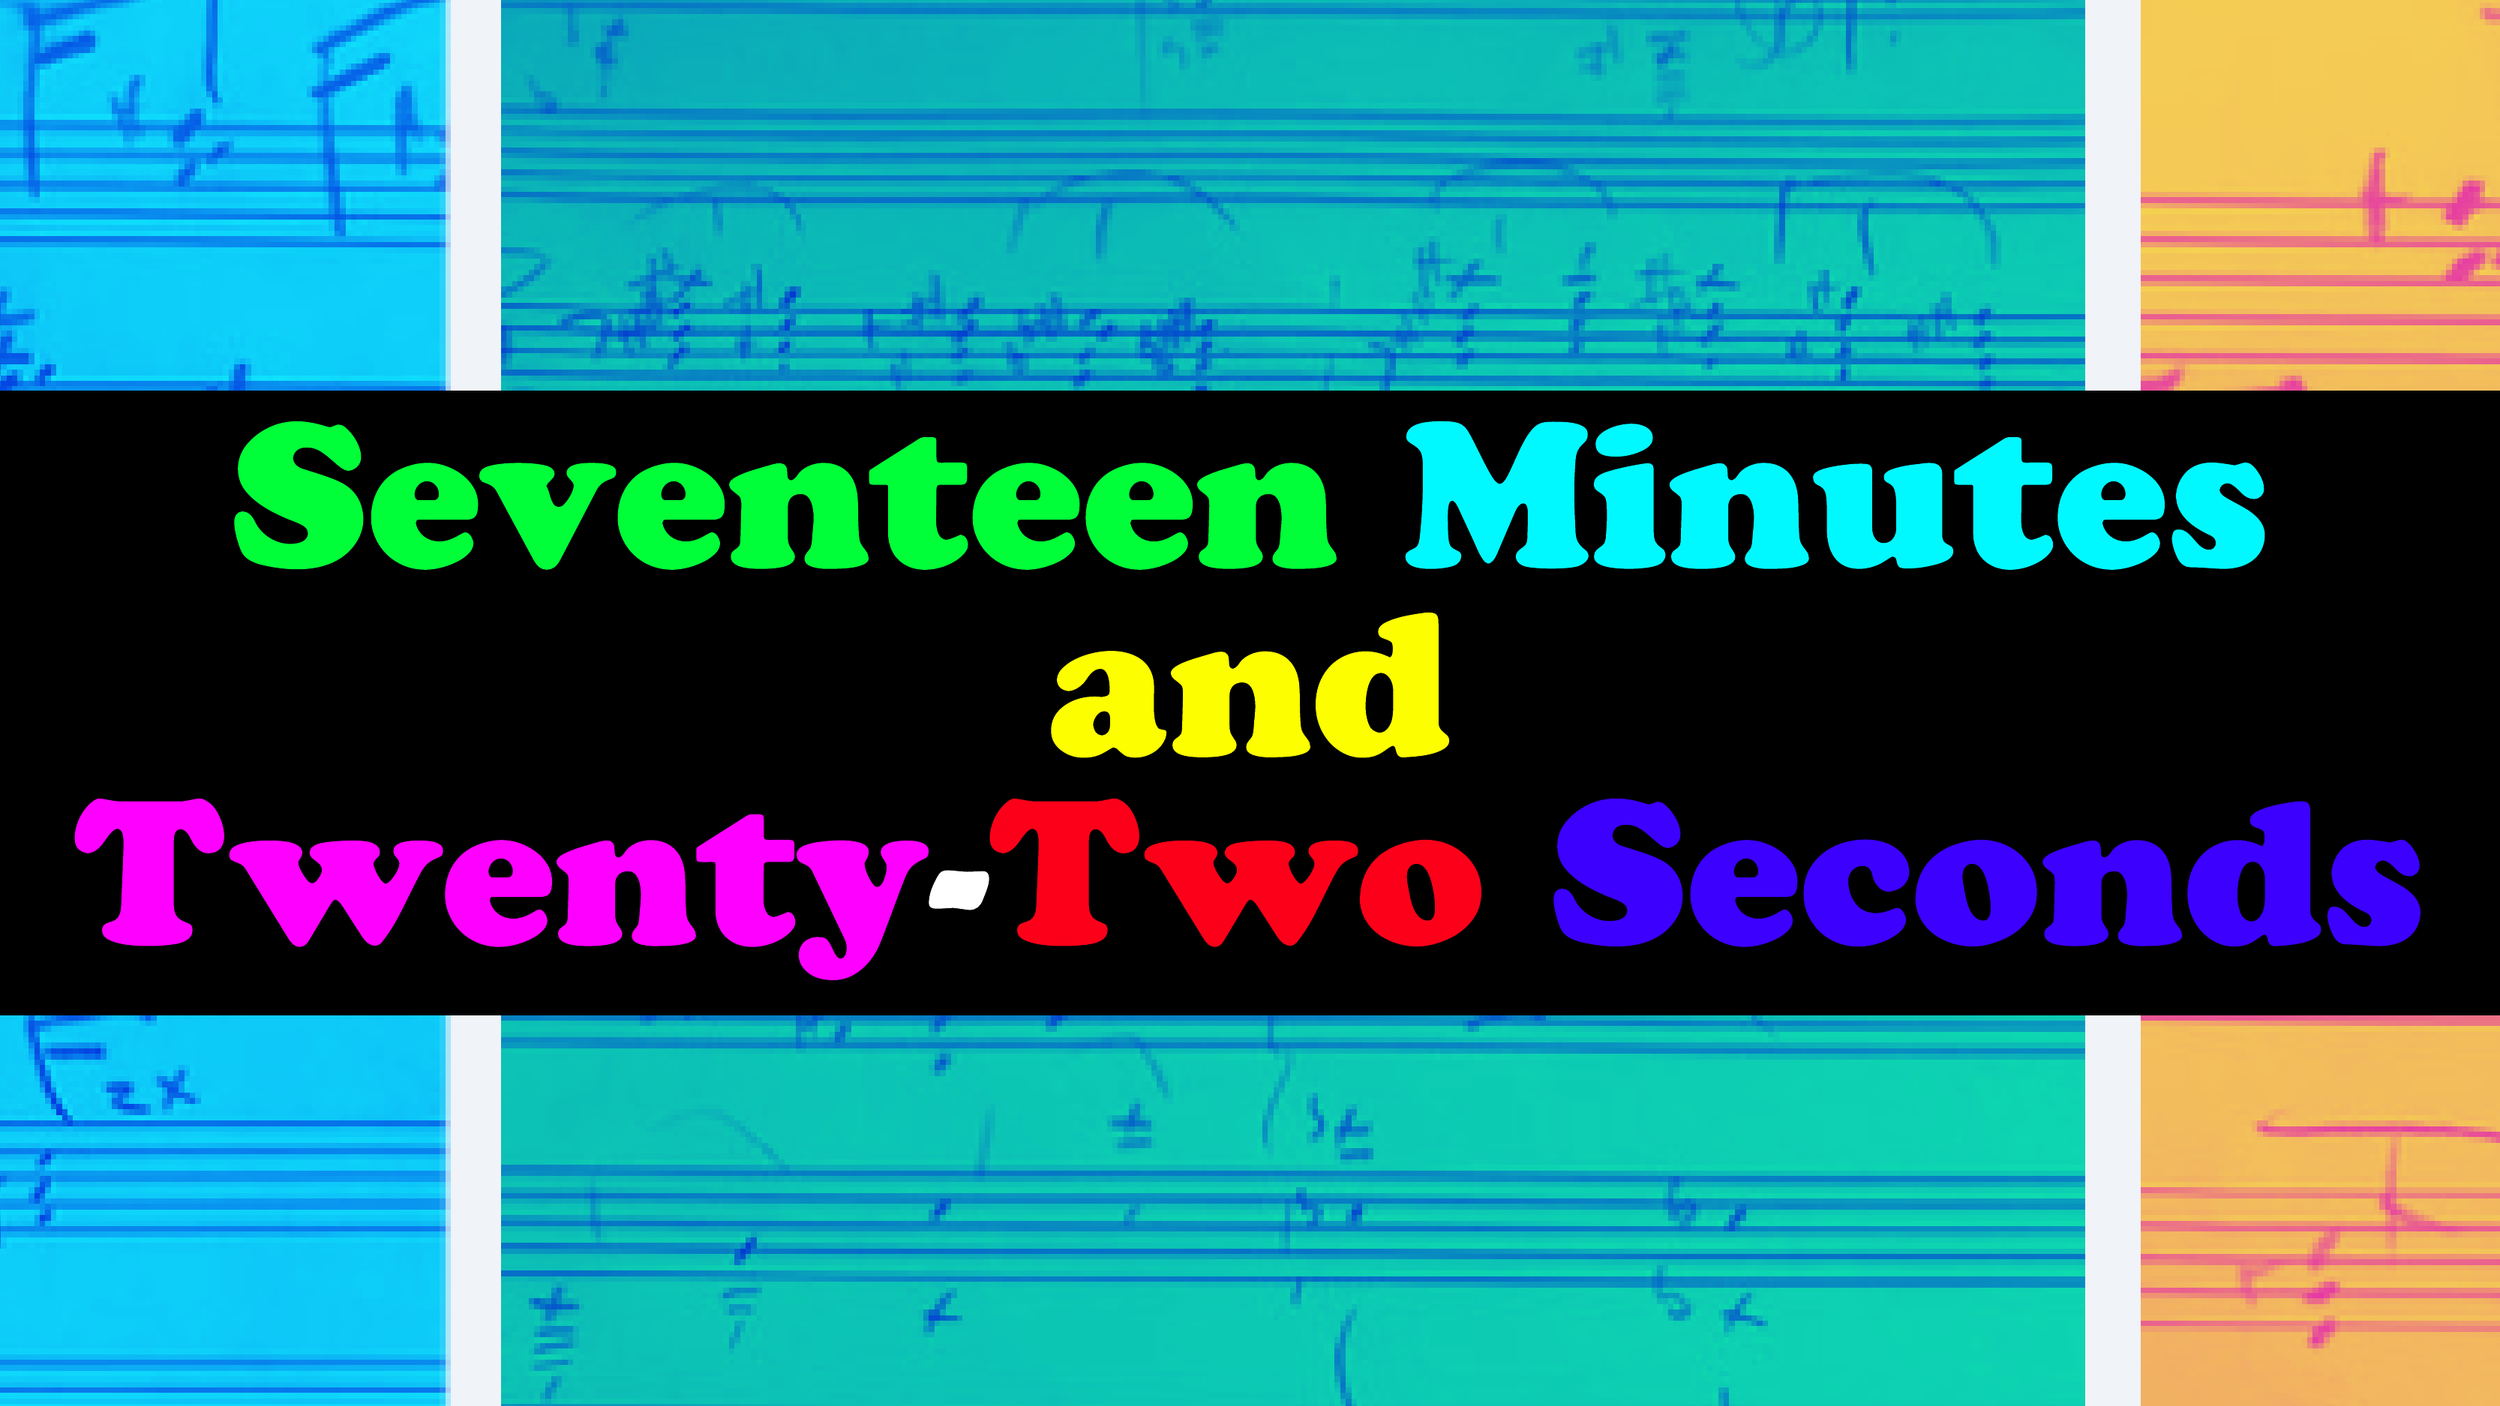 Seventeen Minutes and Twenty-Two Seconds